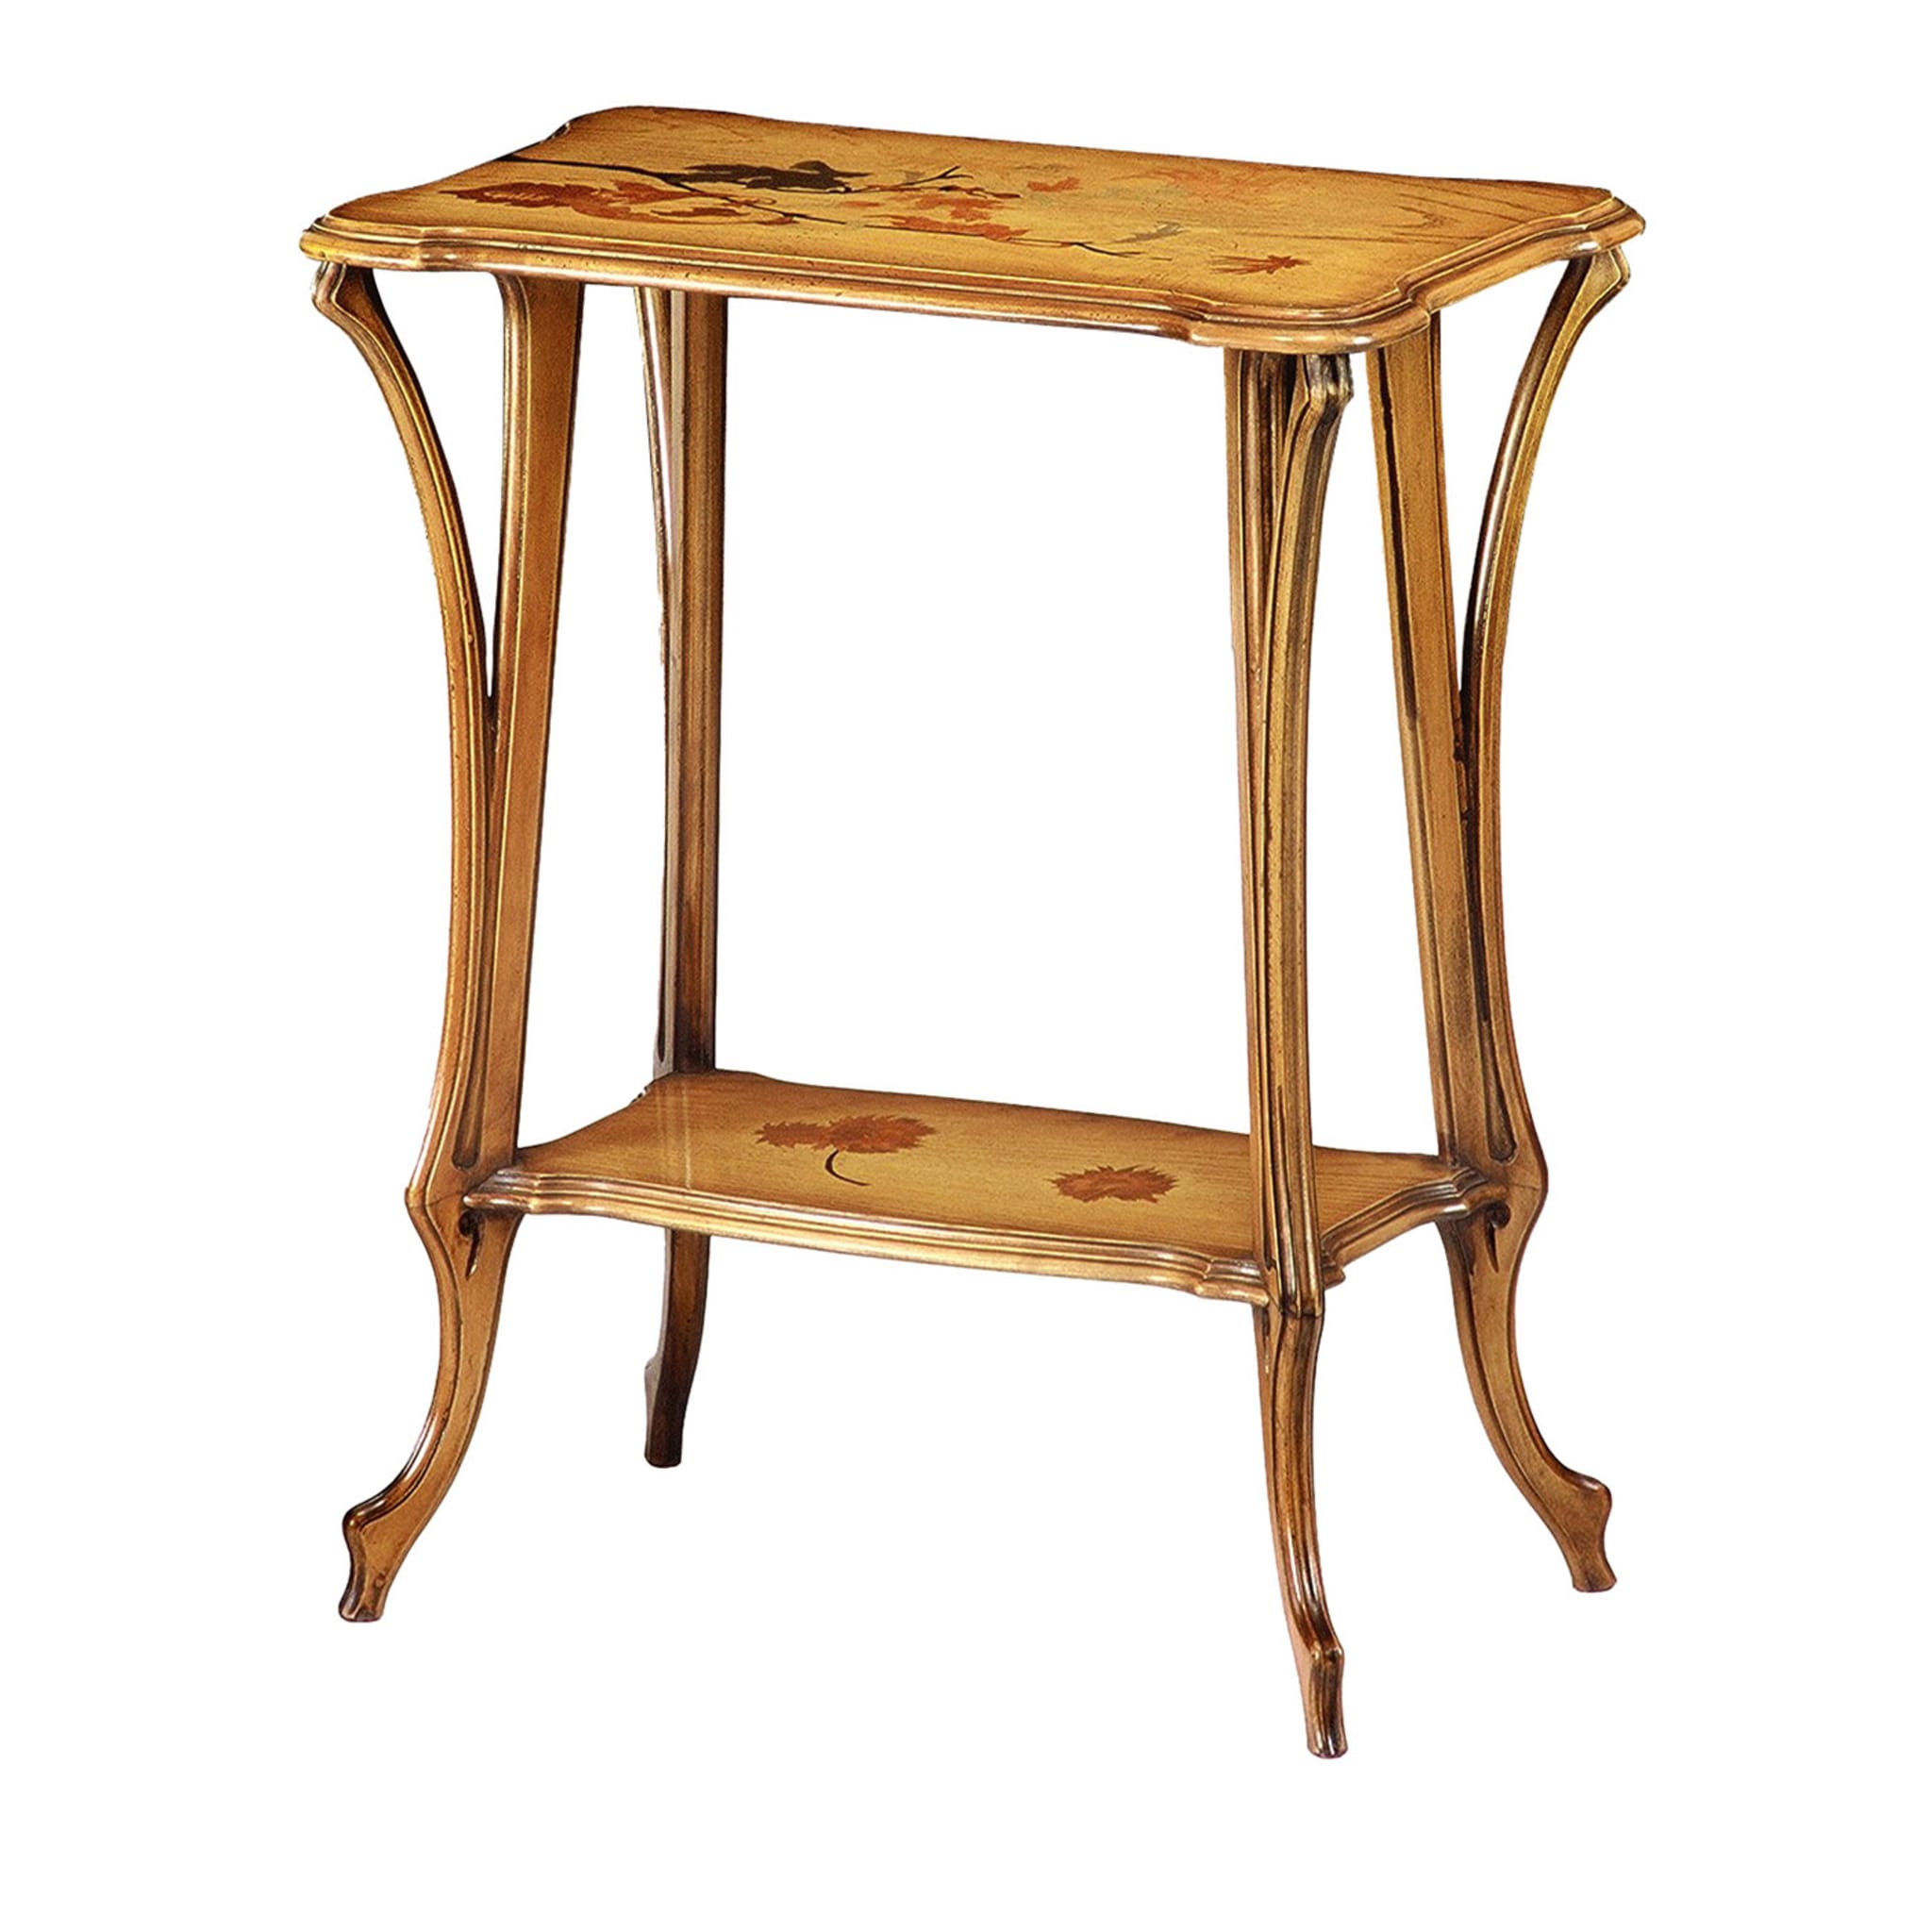 French Art Nouveau-Style Inlaid Shaped Side Table by Emile Gallè - Main view